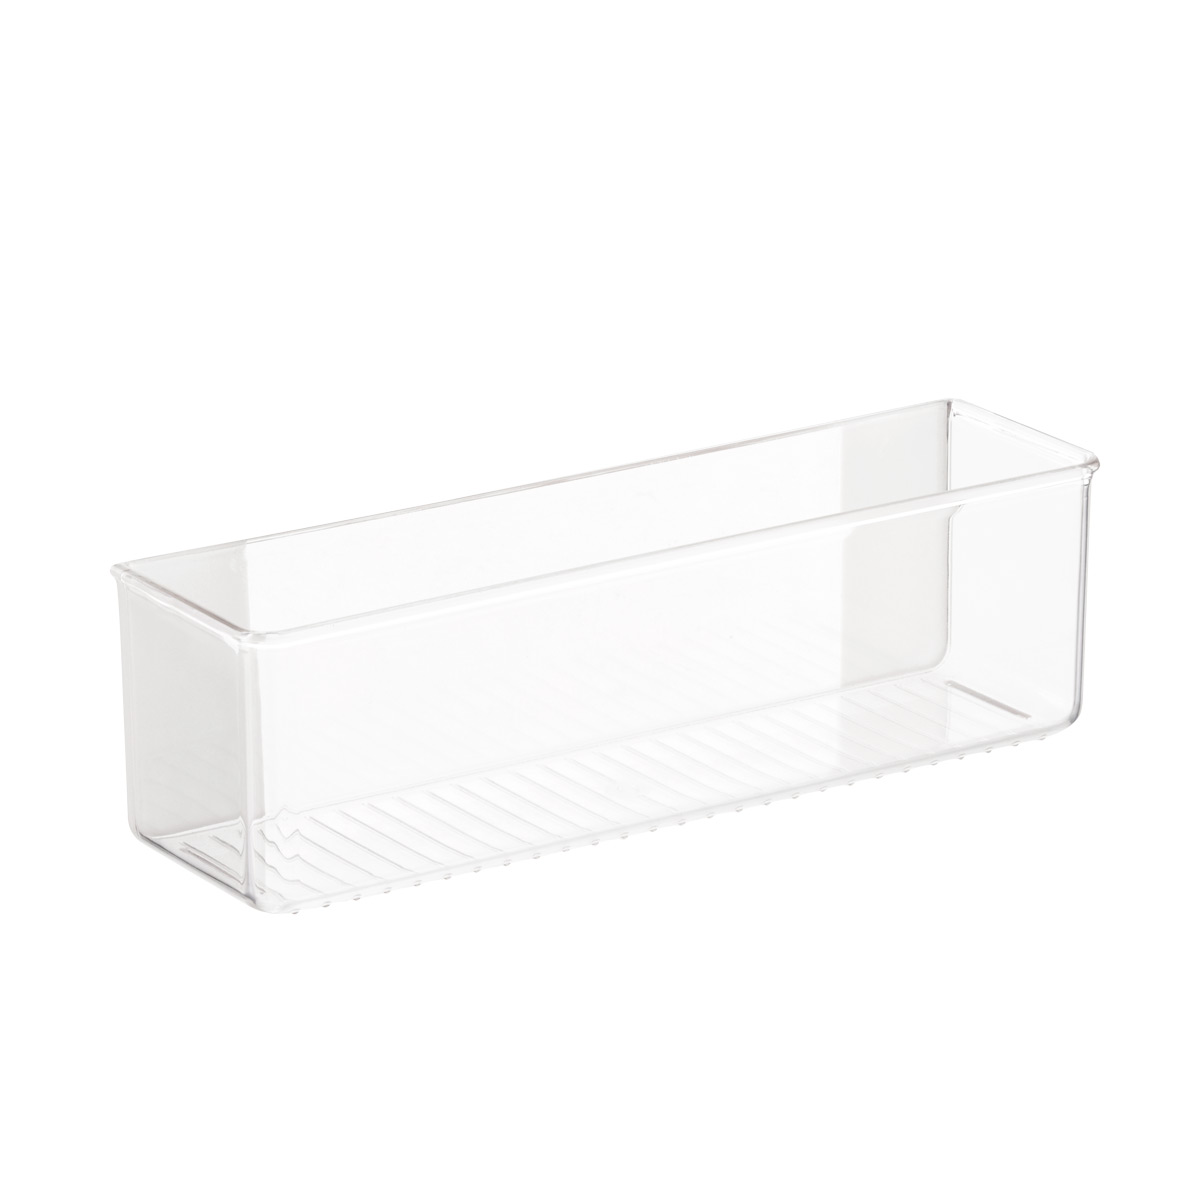 https://www.containerstore.com/catalogimages/314976/10071405-affixx-adhesive-organizer-b.jpg